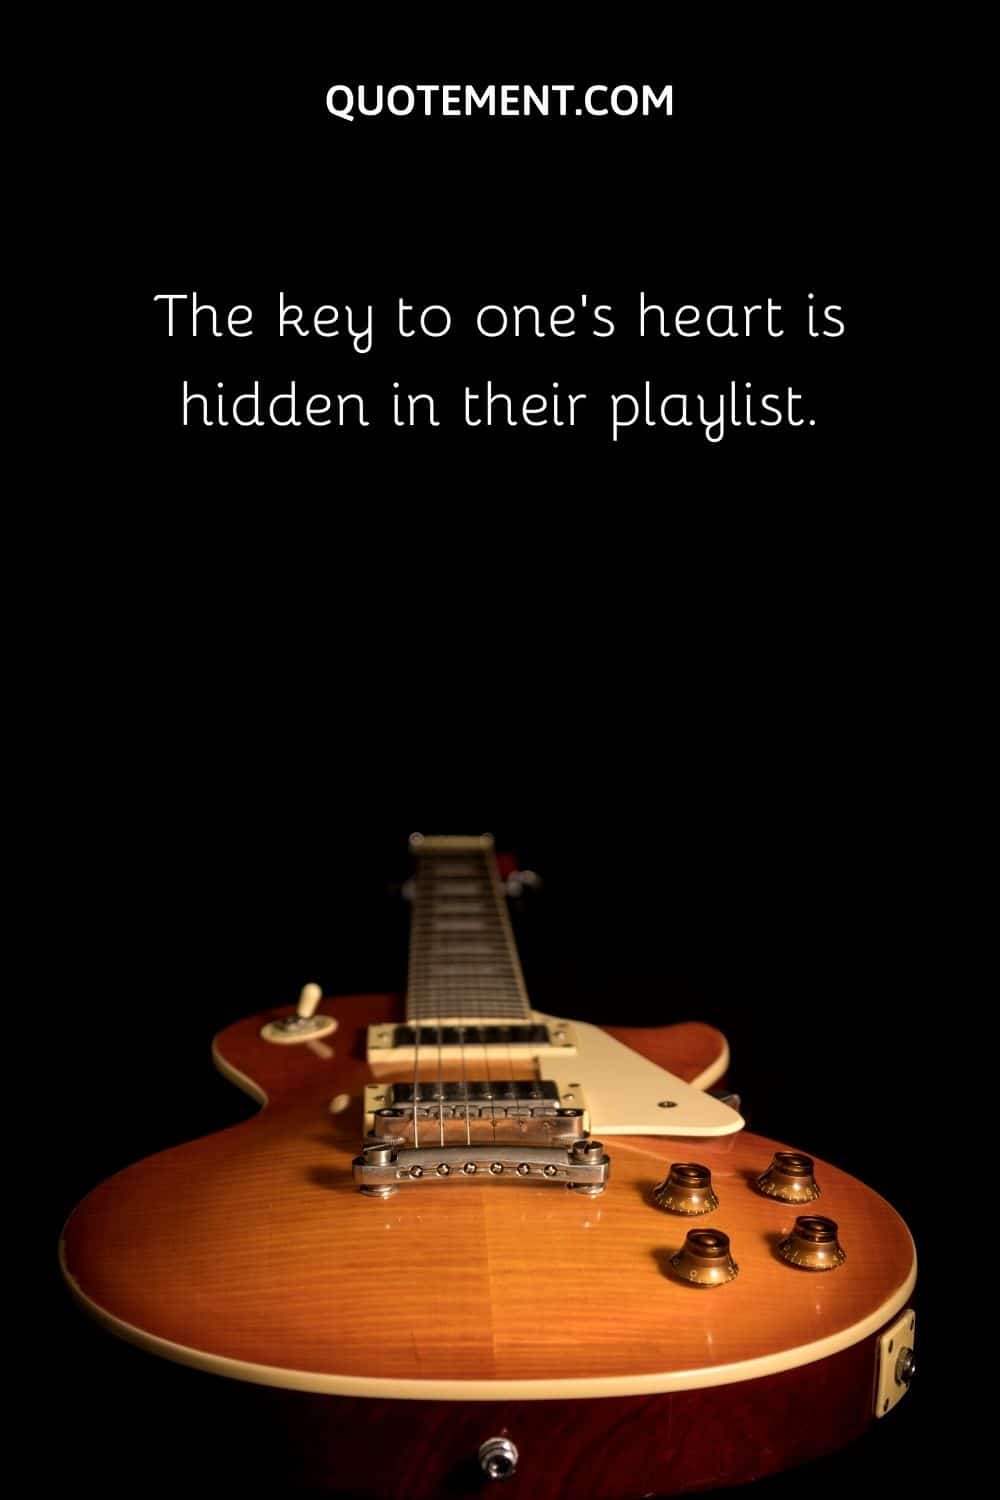 The key to one’s heart is hidden in their playlist.